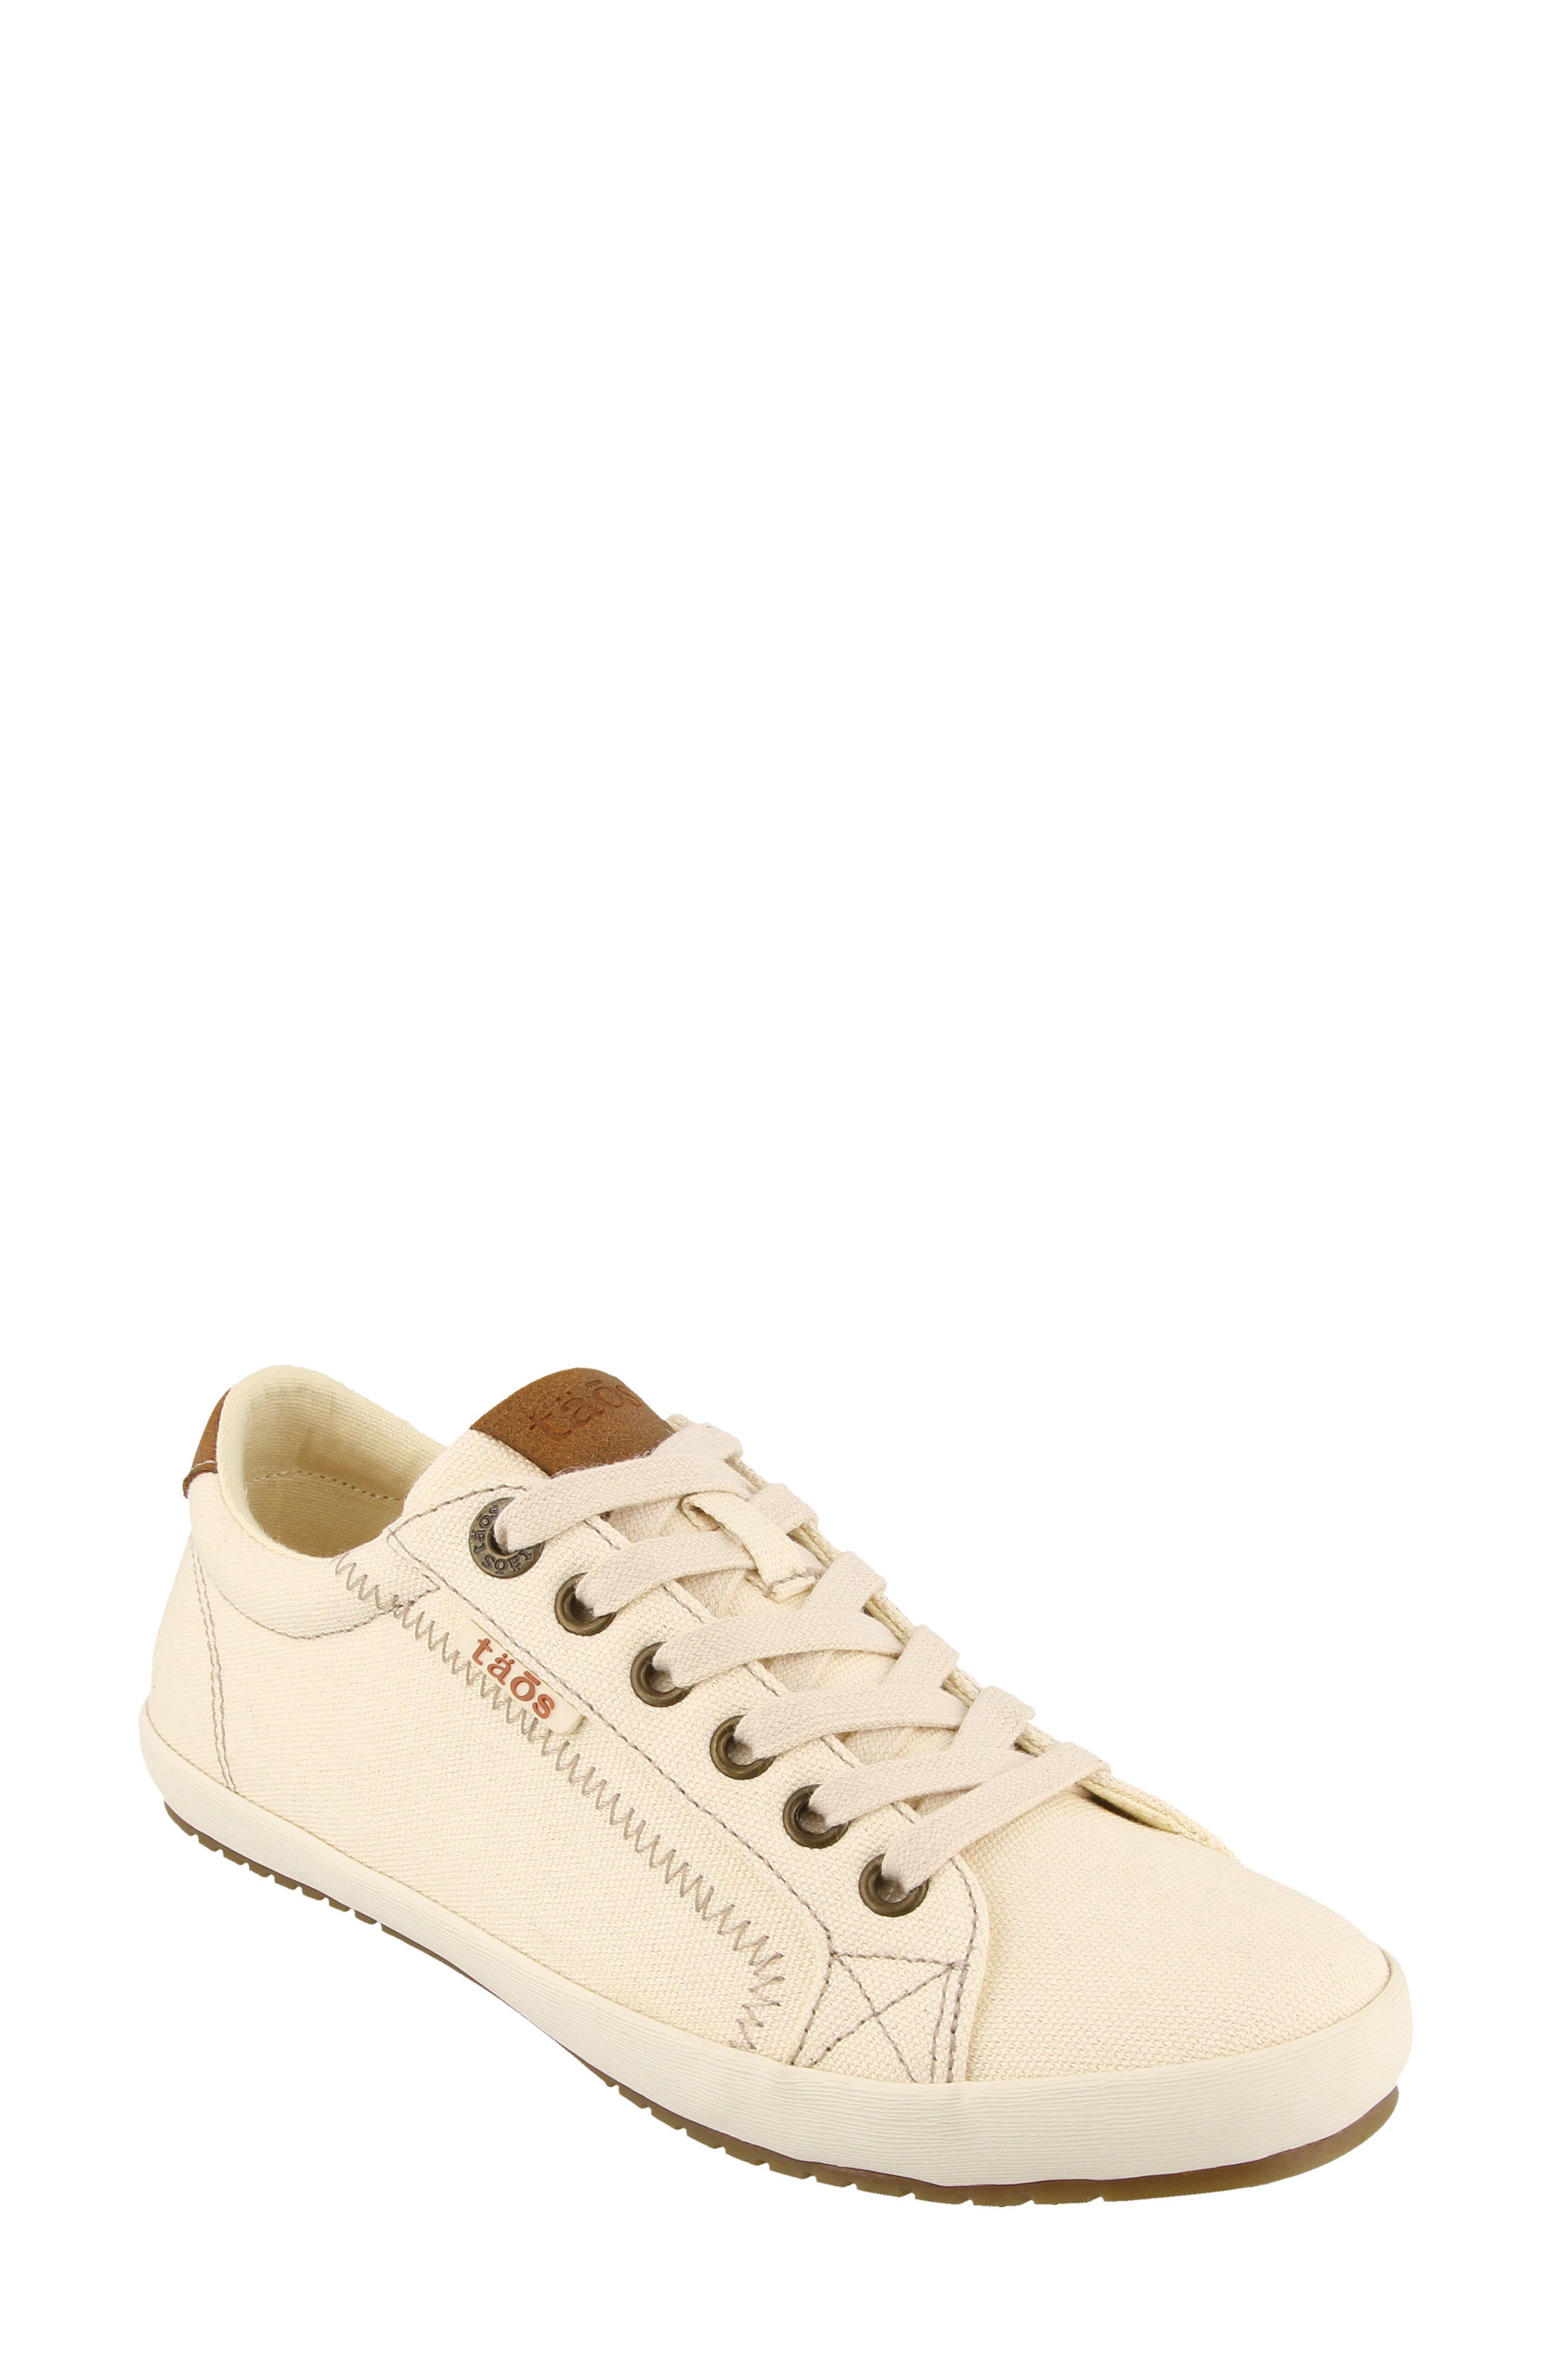 Women's Taos Shoes | Nordstrom